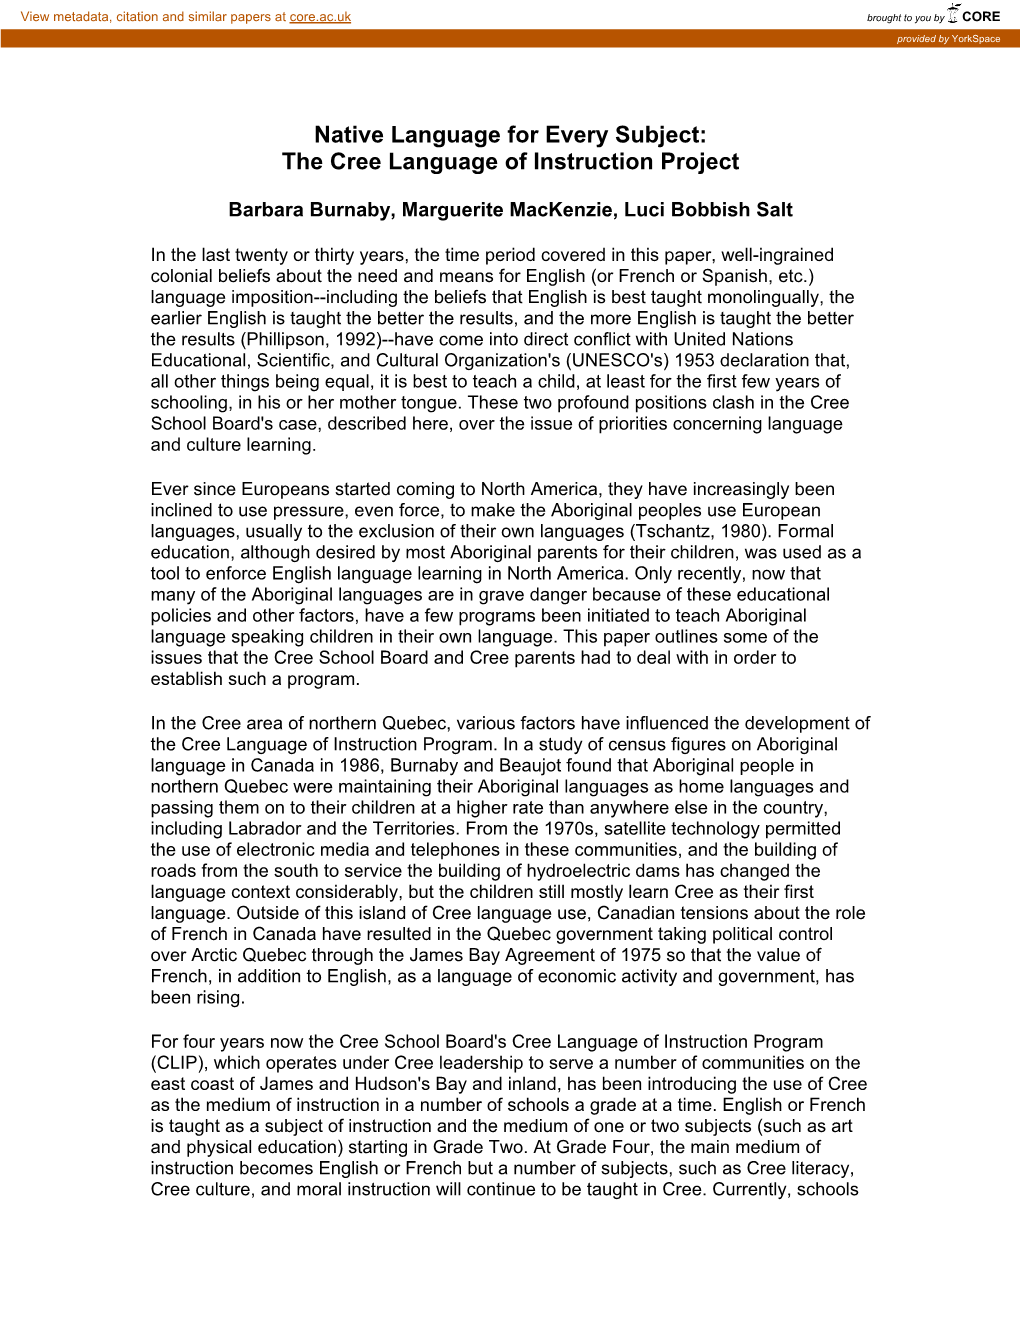 Native Language for Every Subject: the Cree Language of Instruction Project